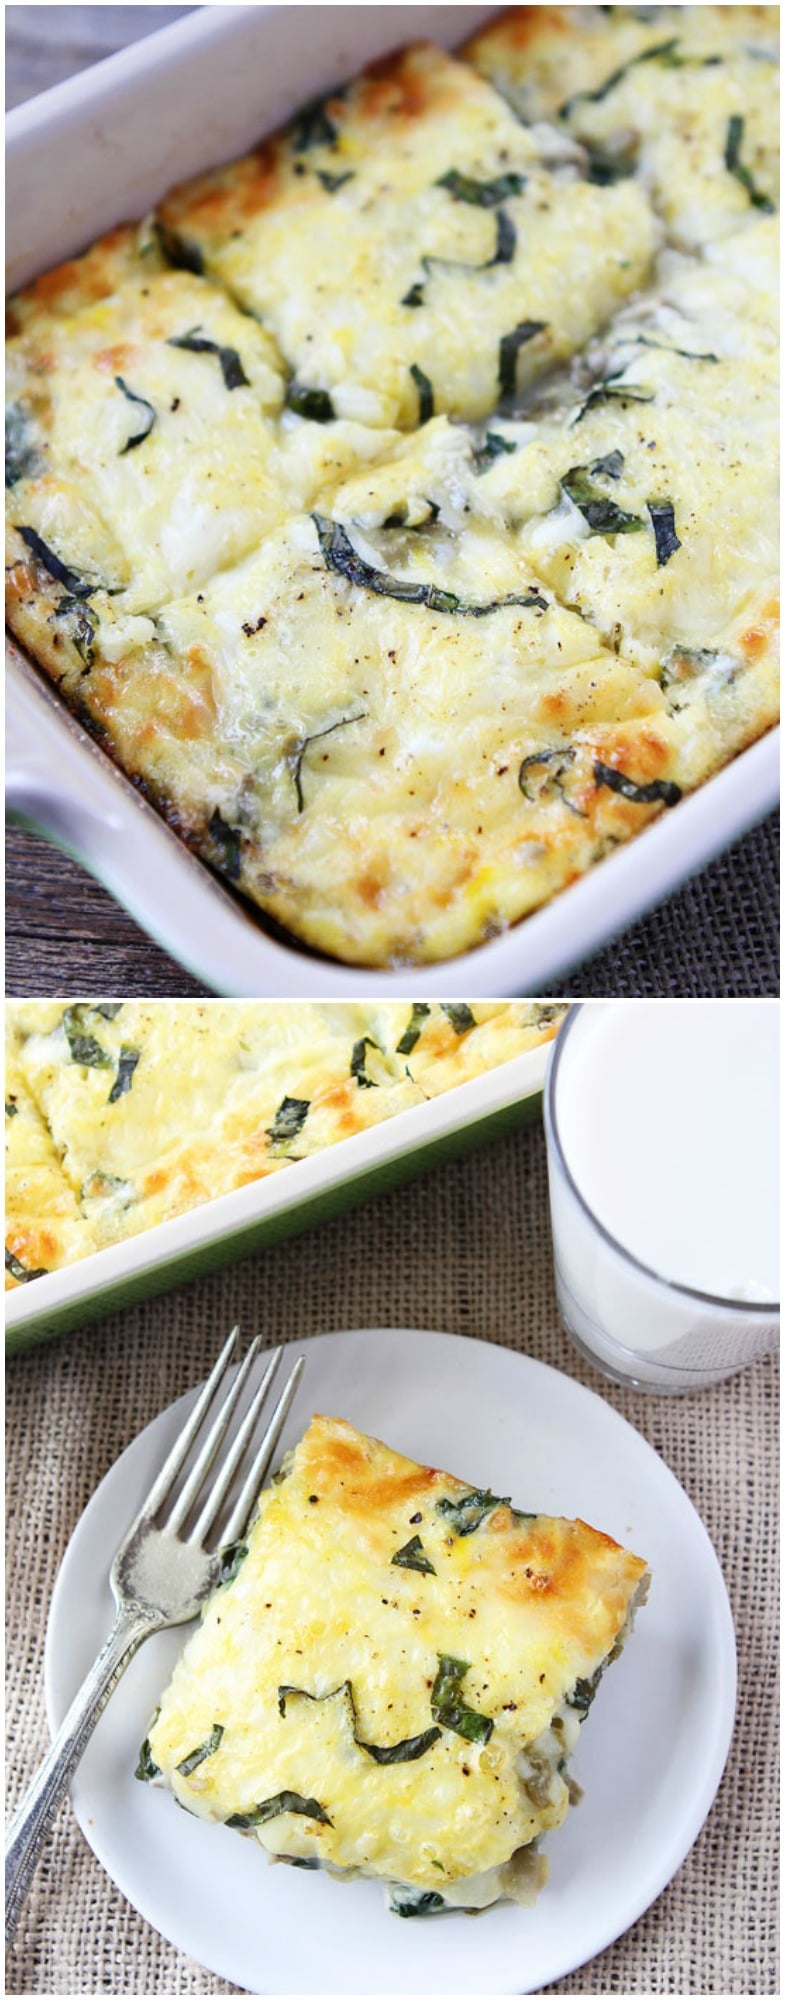 Spinach Artichoke Egg Casserole Recipe on twopeasandtheirpod.com Love this easy breakfast casserole! It's great for entertaining too!